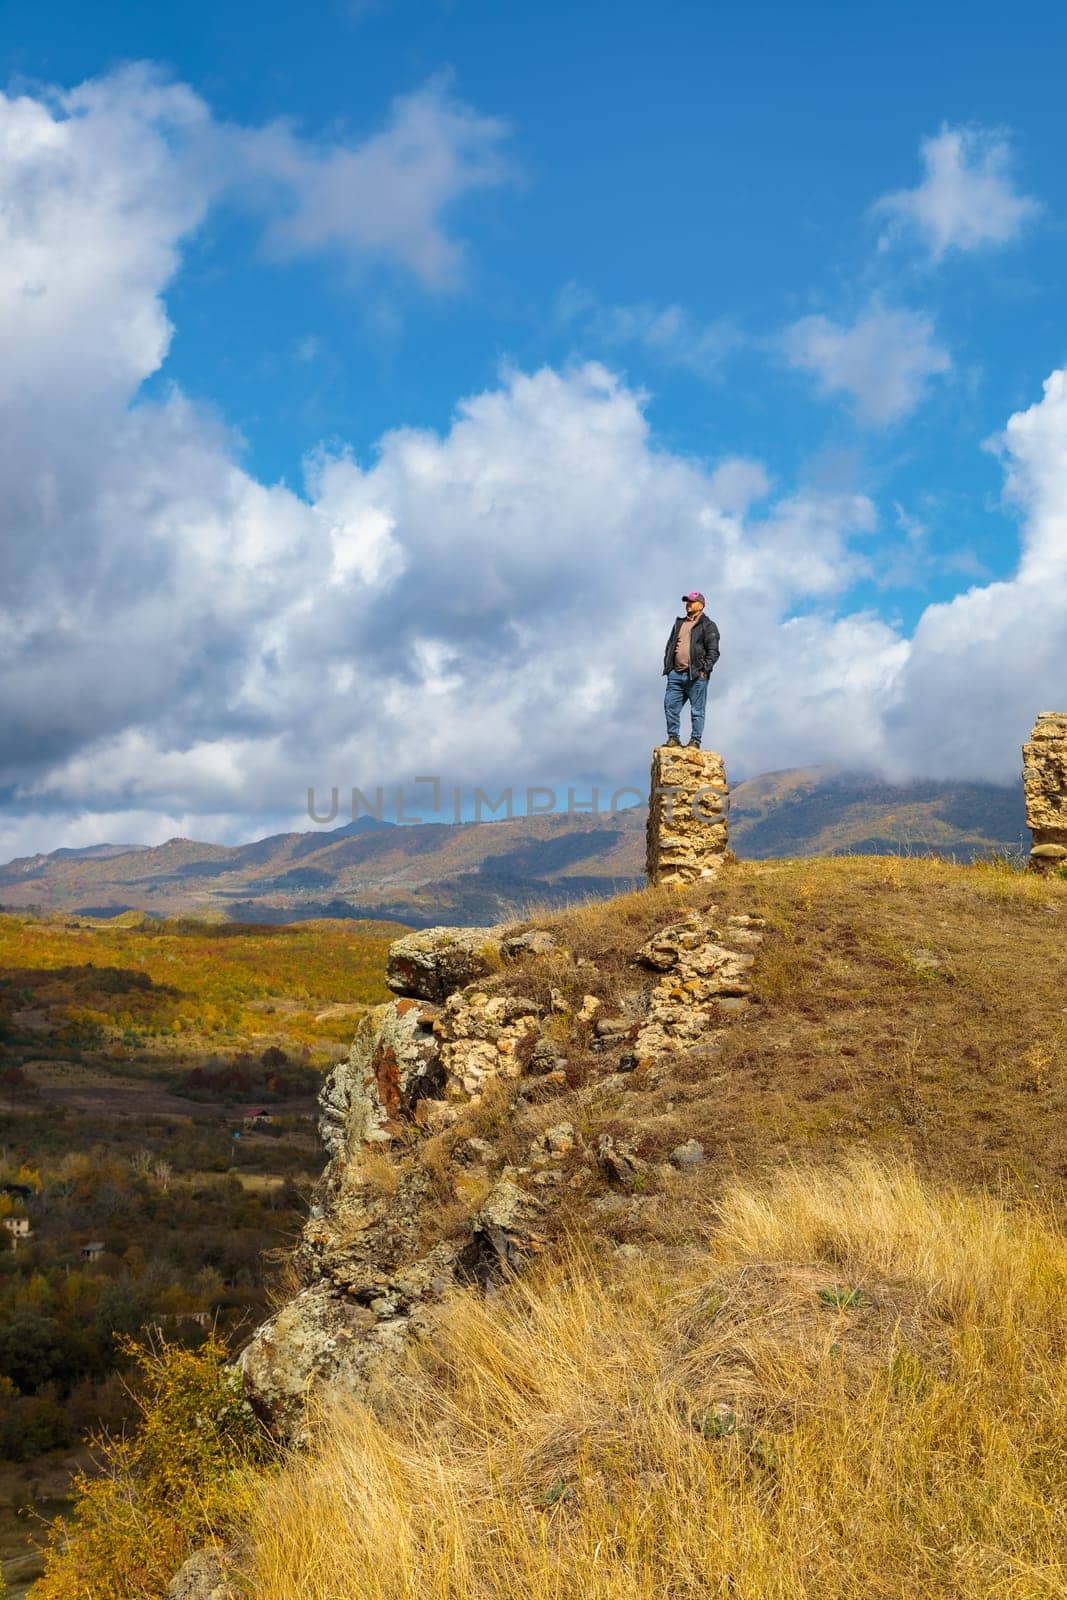 Man Standing on Ruined Fortress Wall in Mountain Range, Enjoying Scenic View by Yurich32